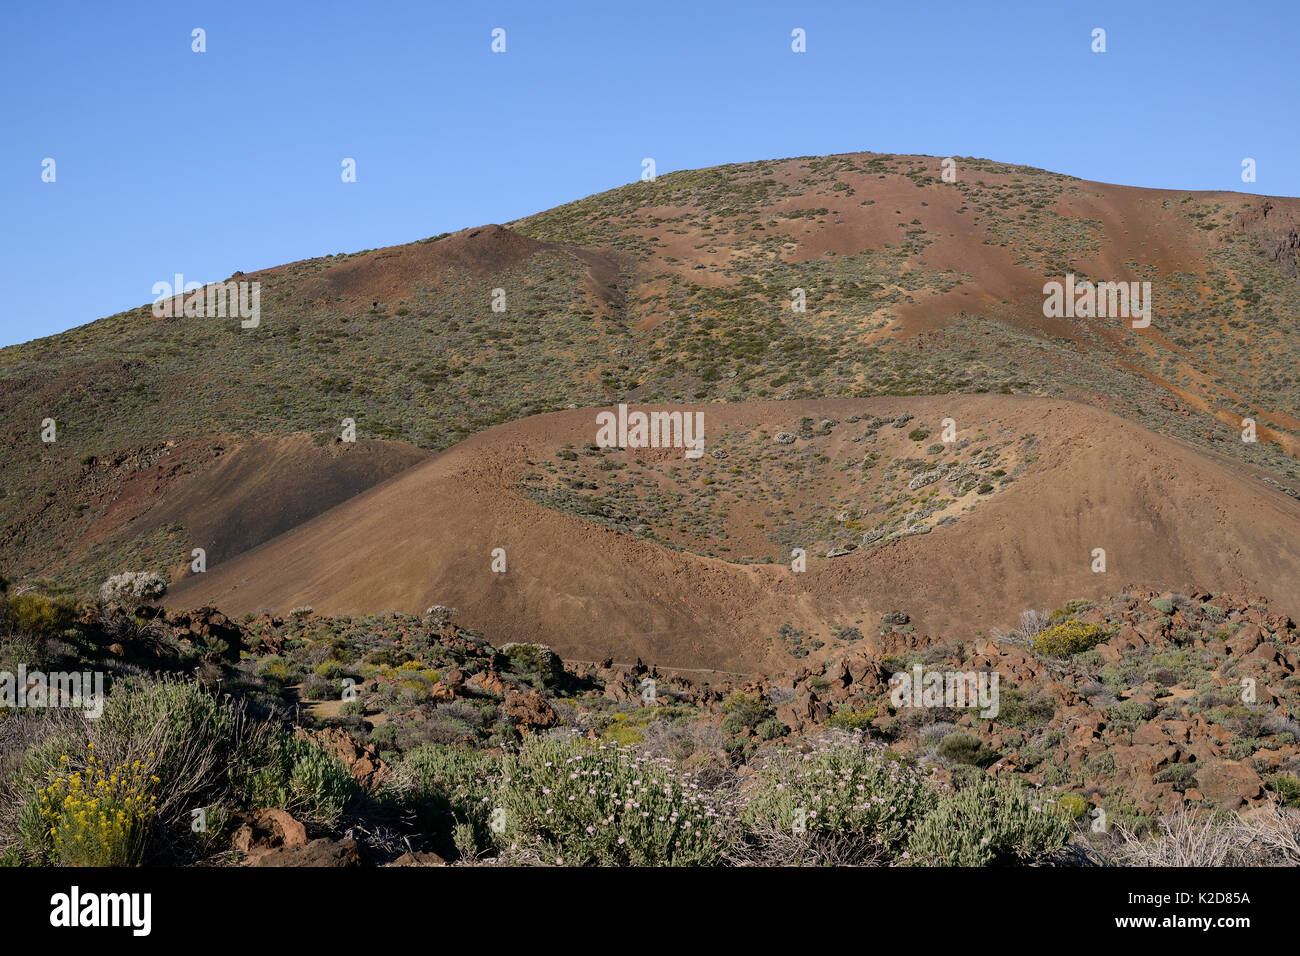 Weathered cinder cone volcano, with the crater colonised by endemic vegetation including Teide white broom (Spartocytisus supranubius), with outer flanks of loose pumice deposits yet to be vegetated, Las Canadas caldera, Teide National Park, Tenerife, May. Stock Photo